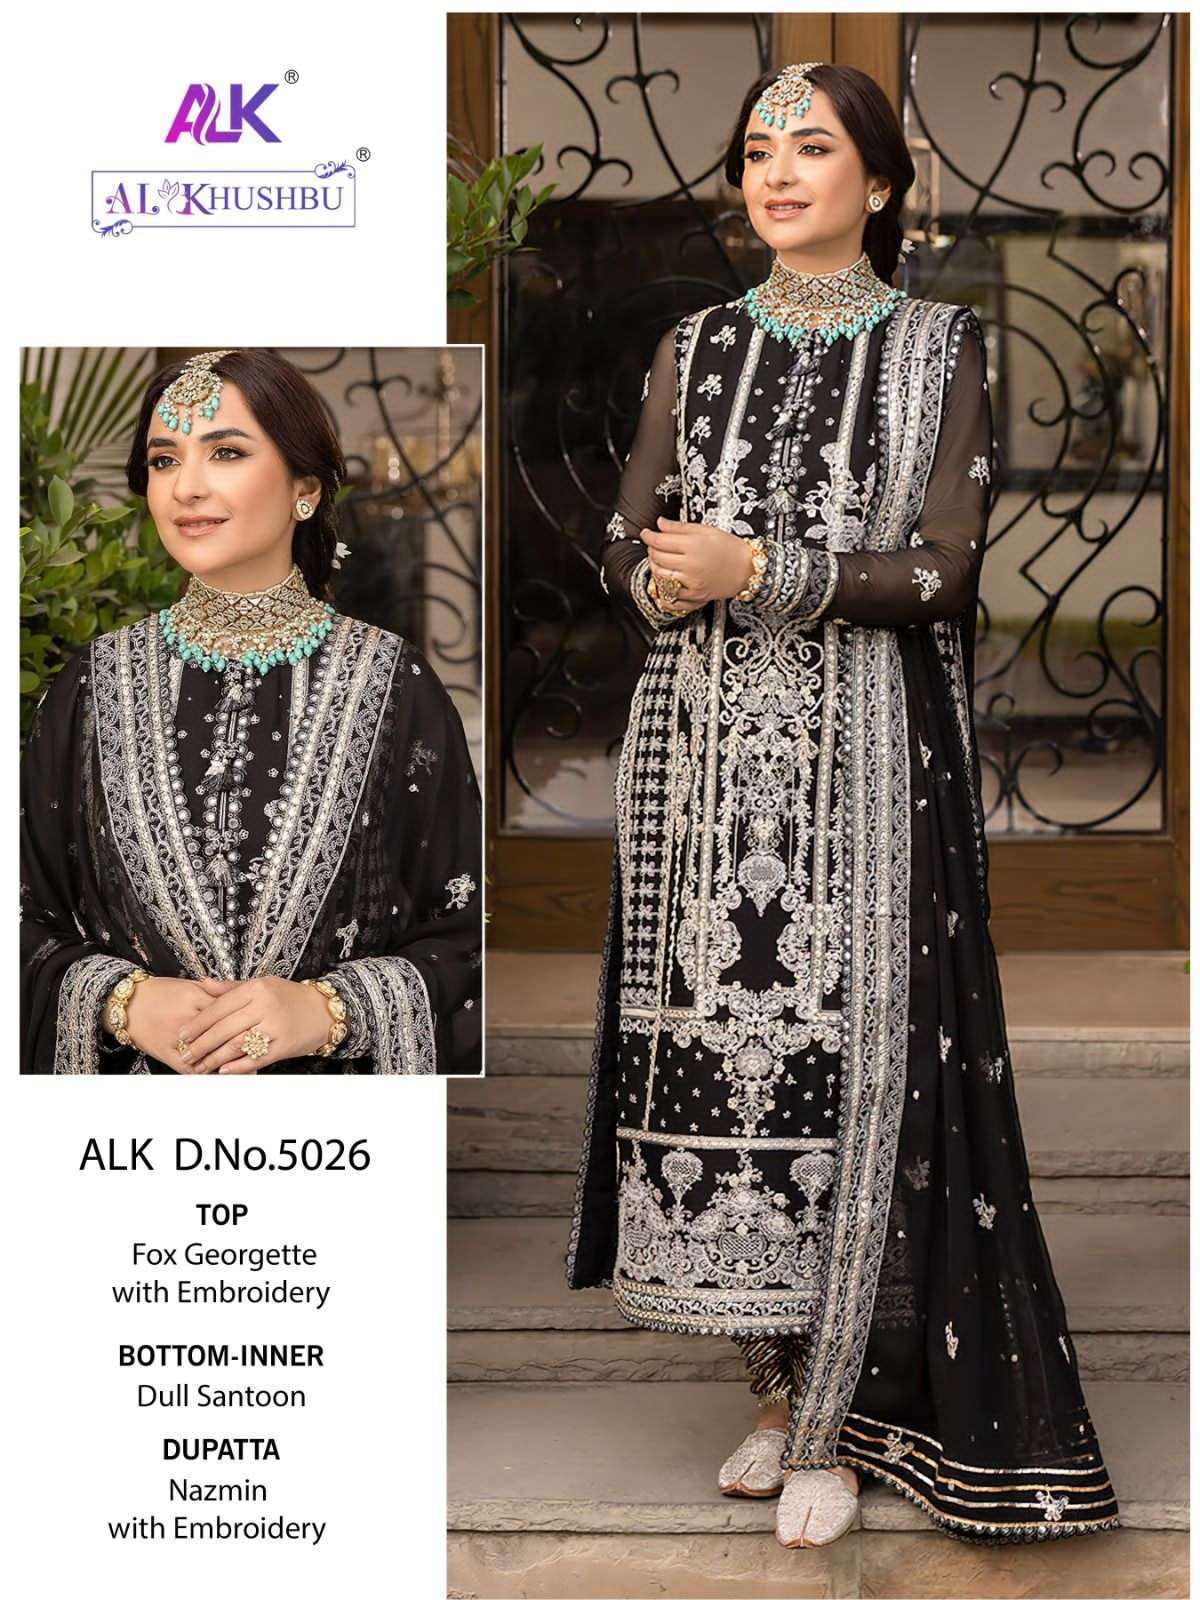 al khusbhu 5026 faux georgette embroidery suit 